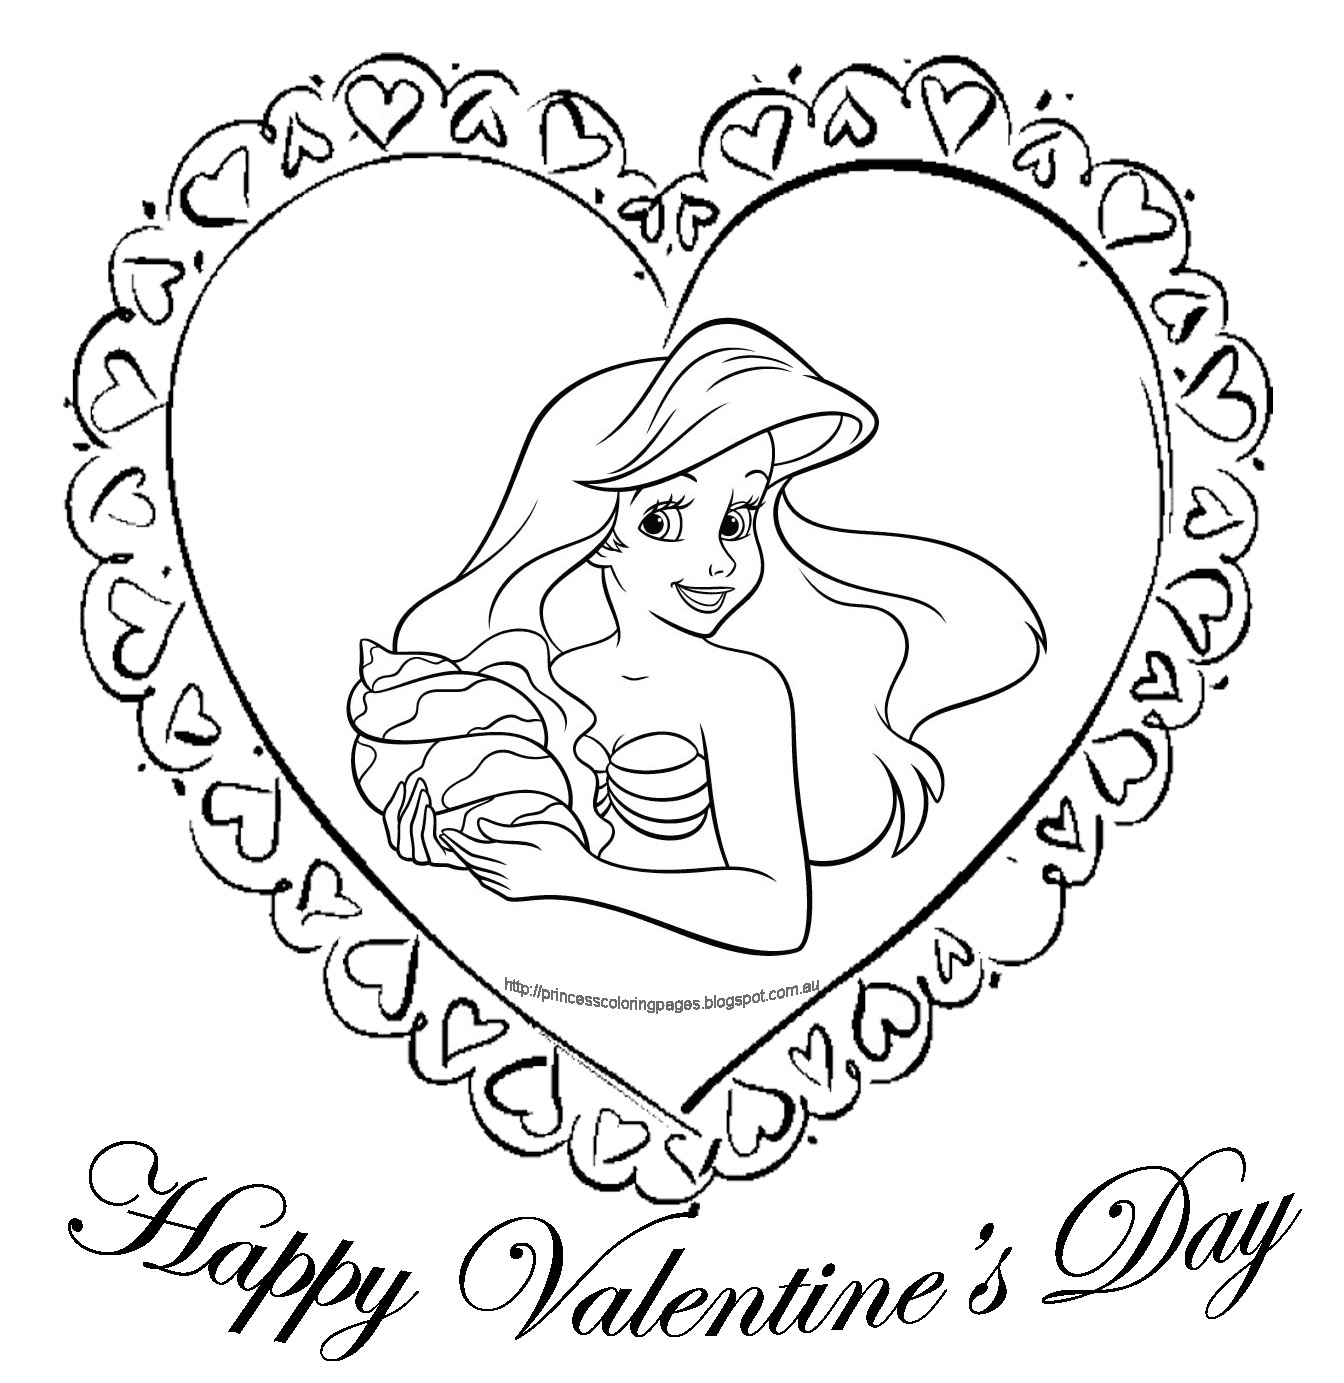 happy valentines day coloring pages princess coloring pages coloring day valentines pages happy 